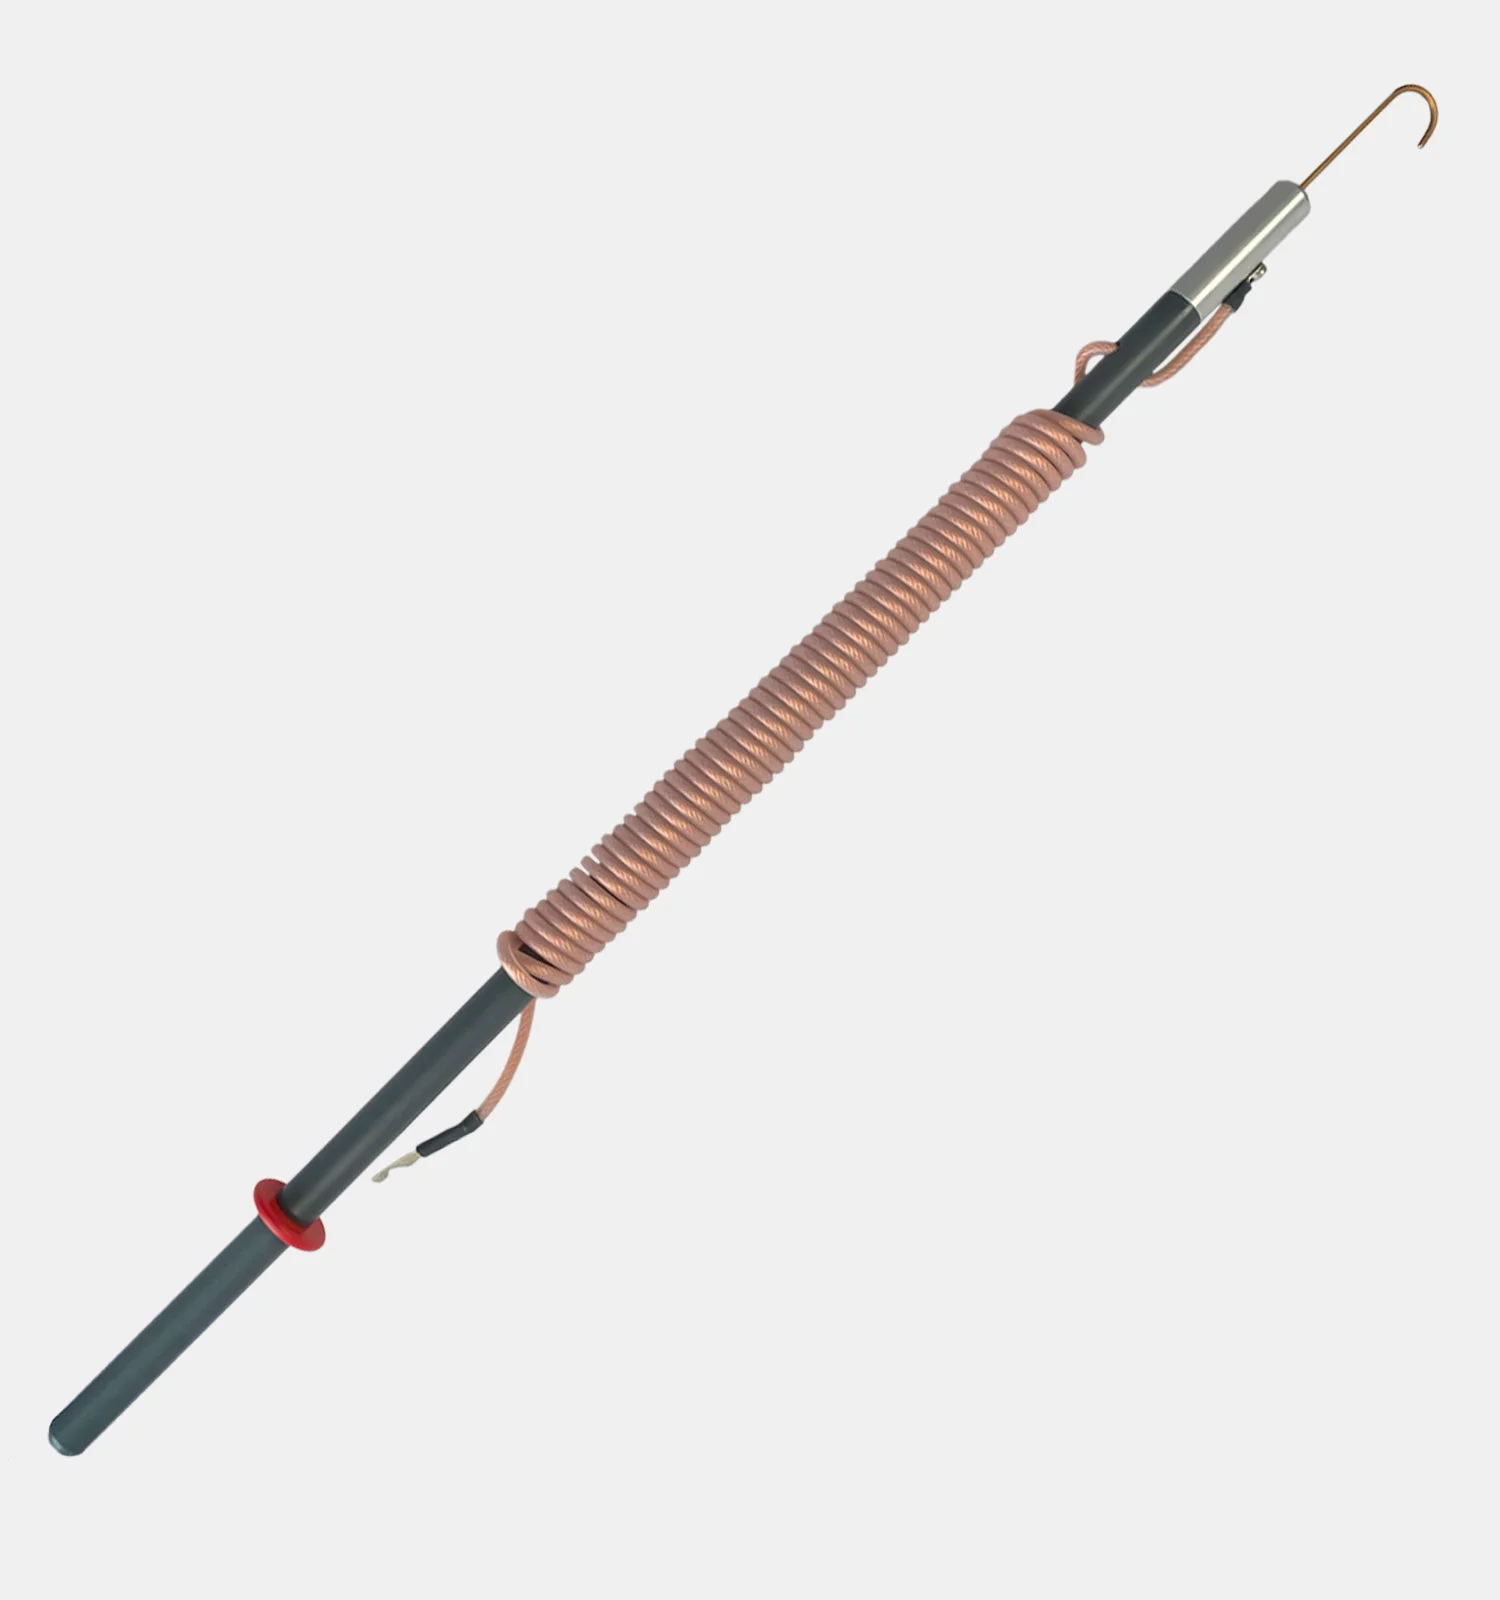 UK Suppliers of ES50 Earthing Stick